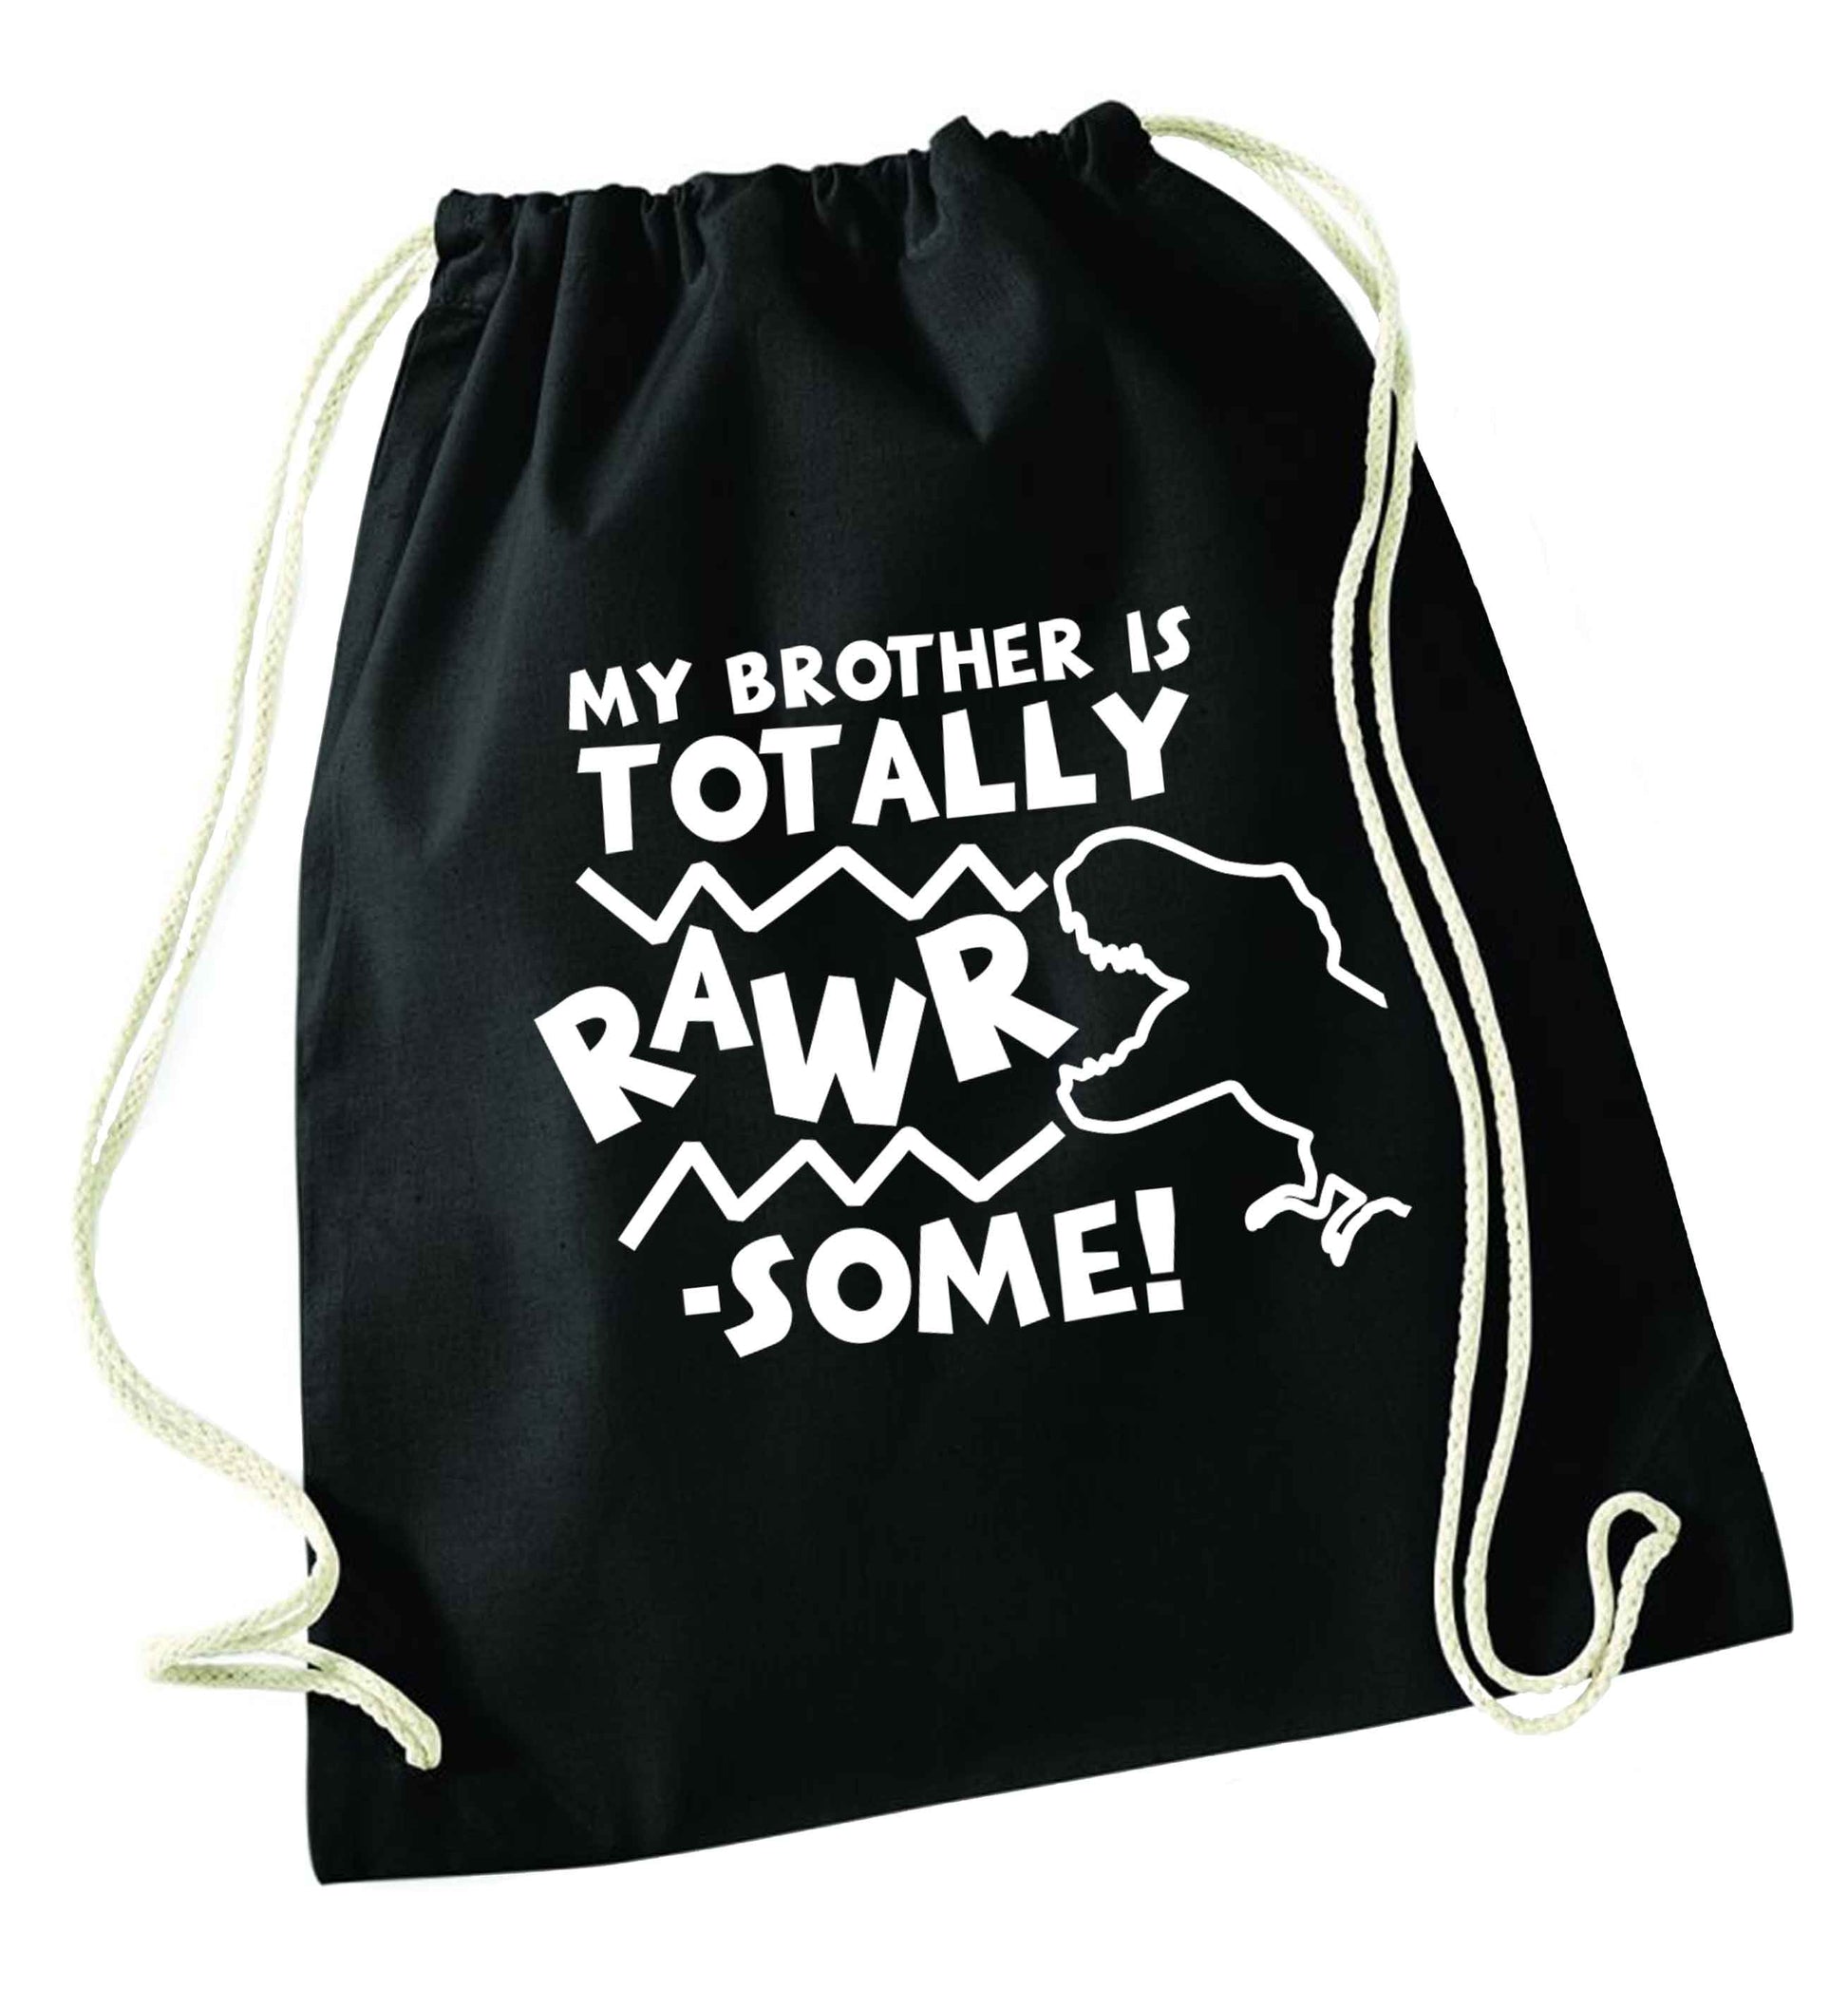 My brother is totally rawrsome black drawstring bag